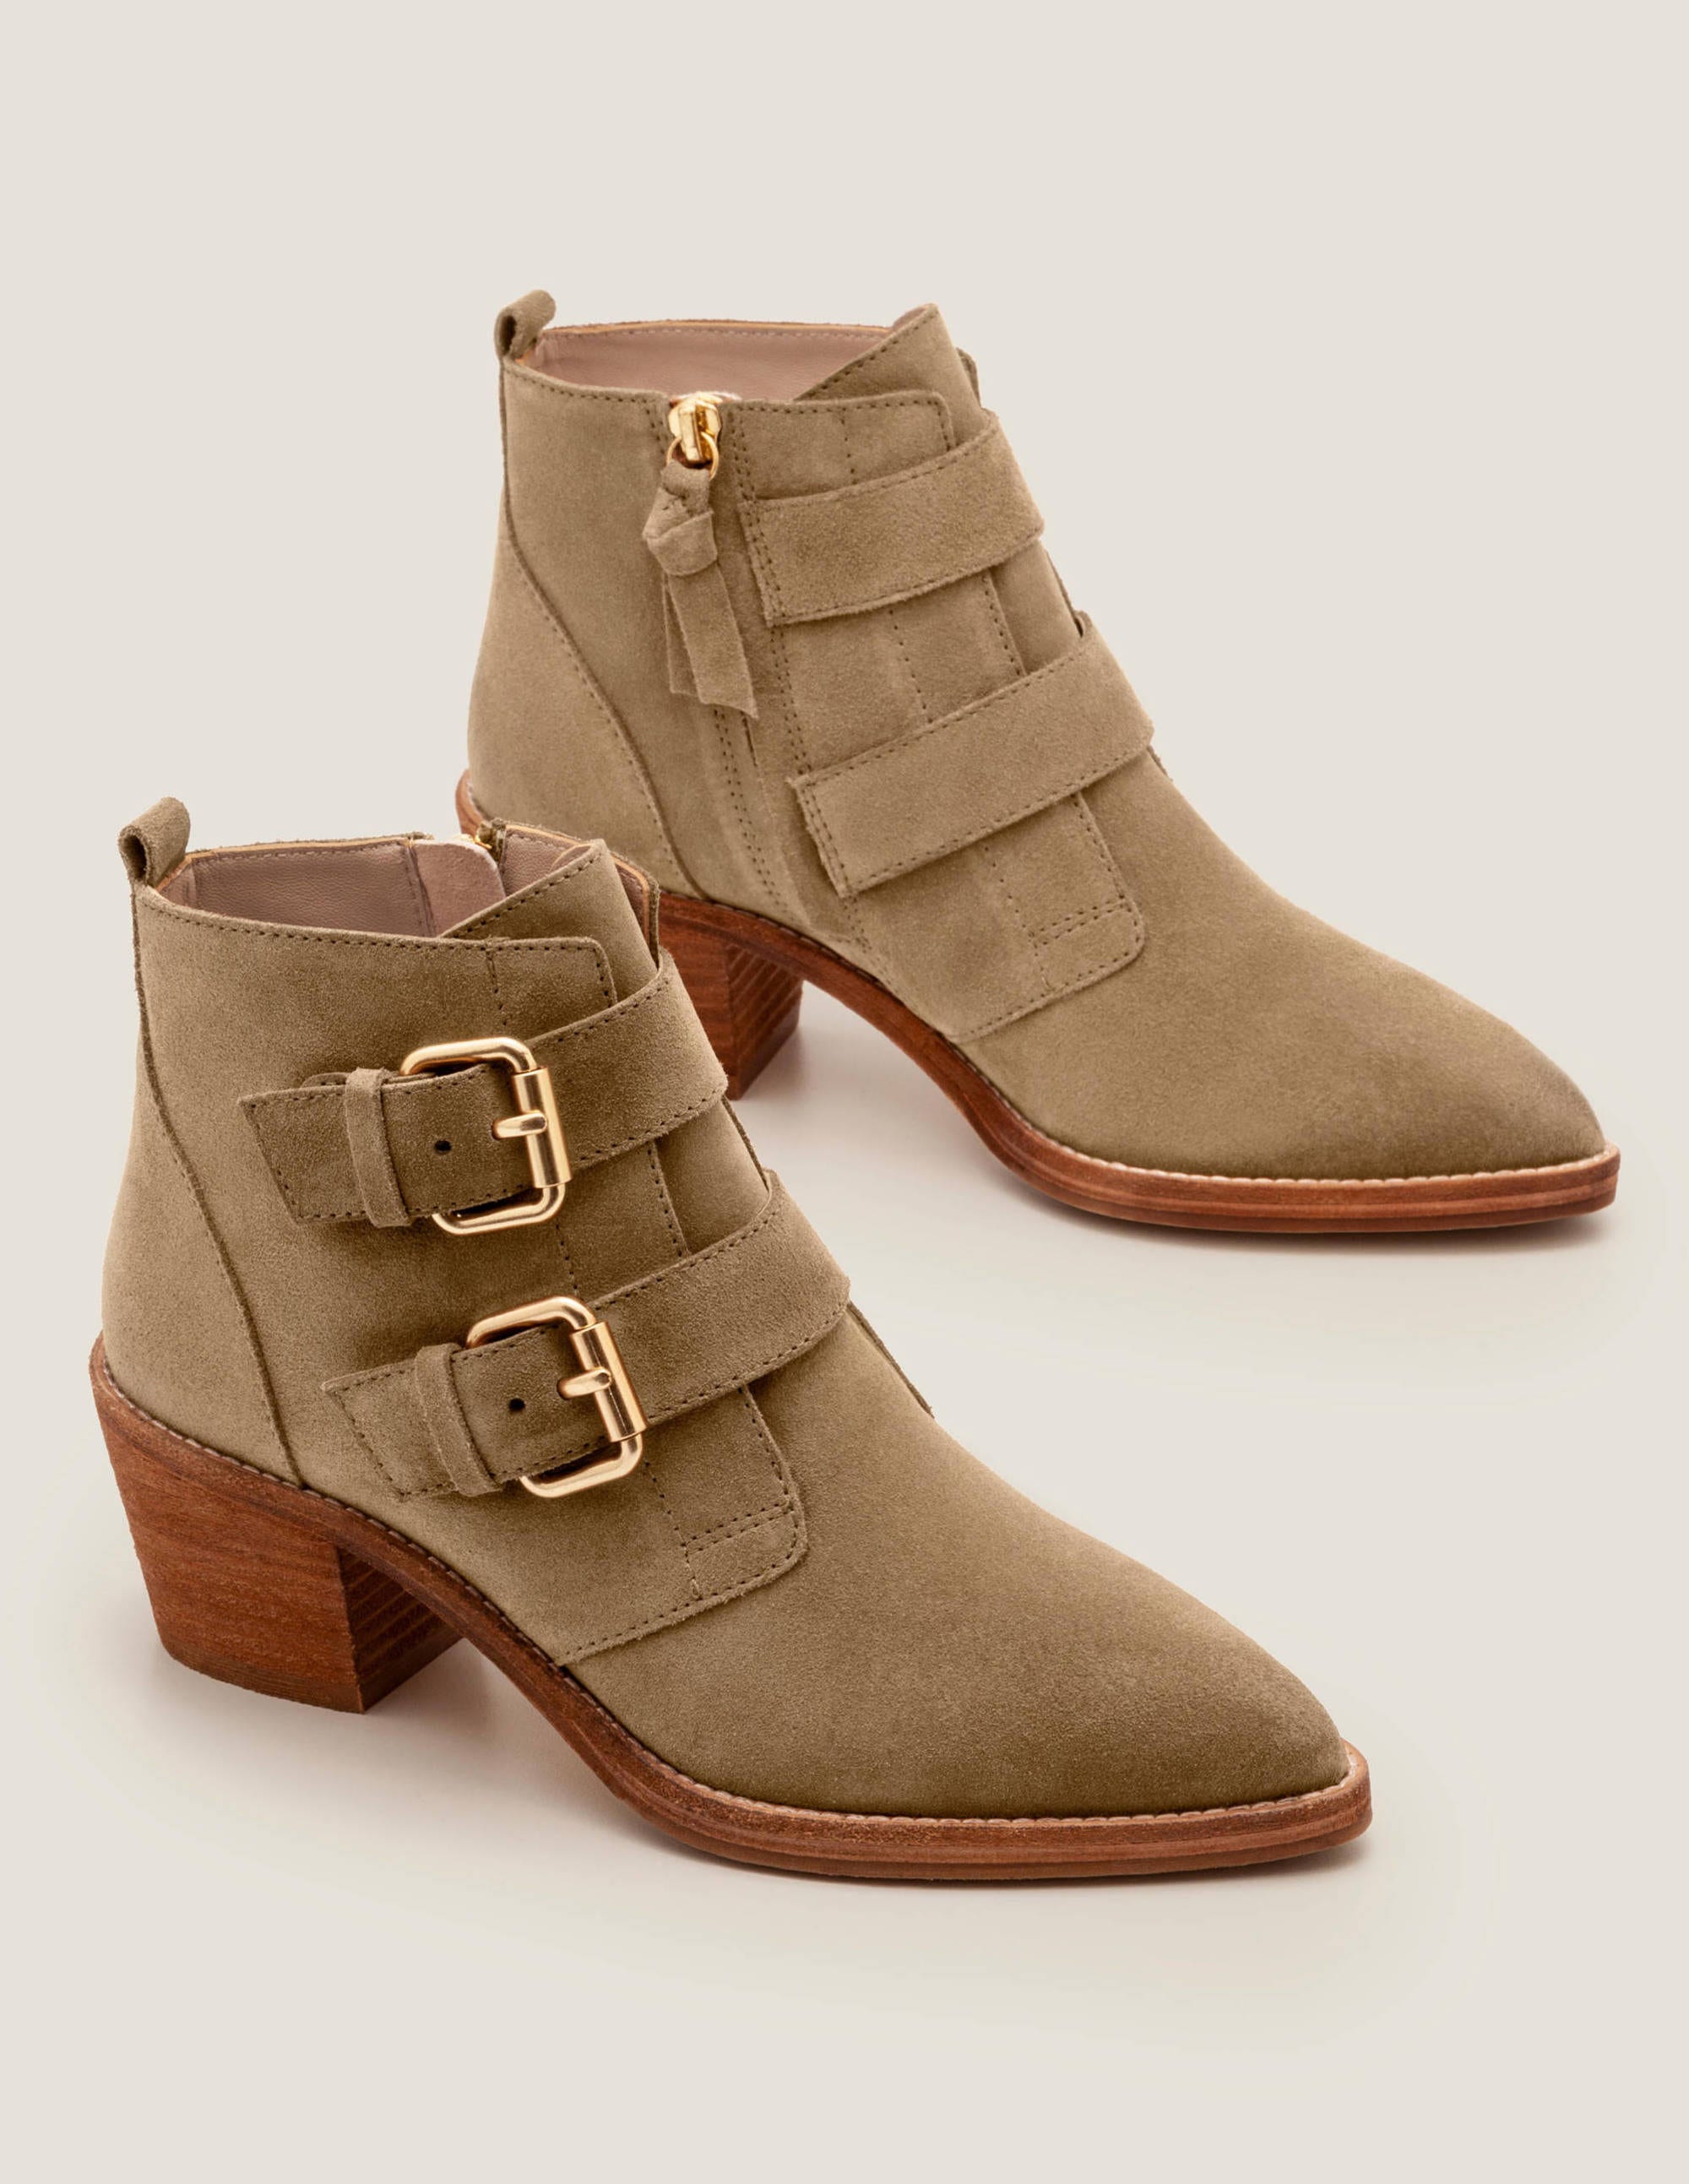 camel pointed toe boots